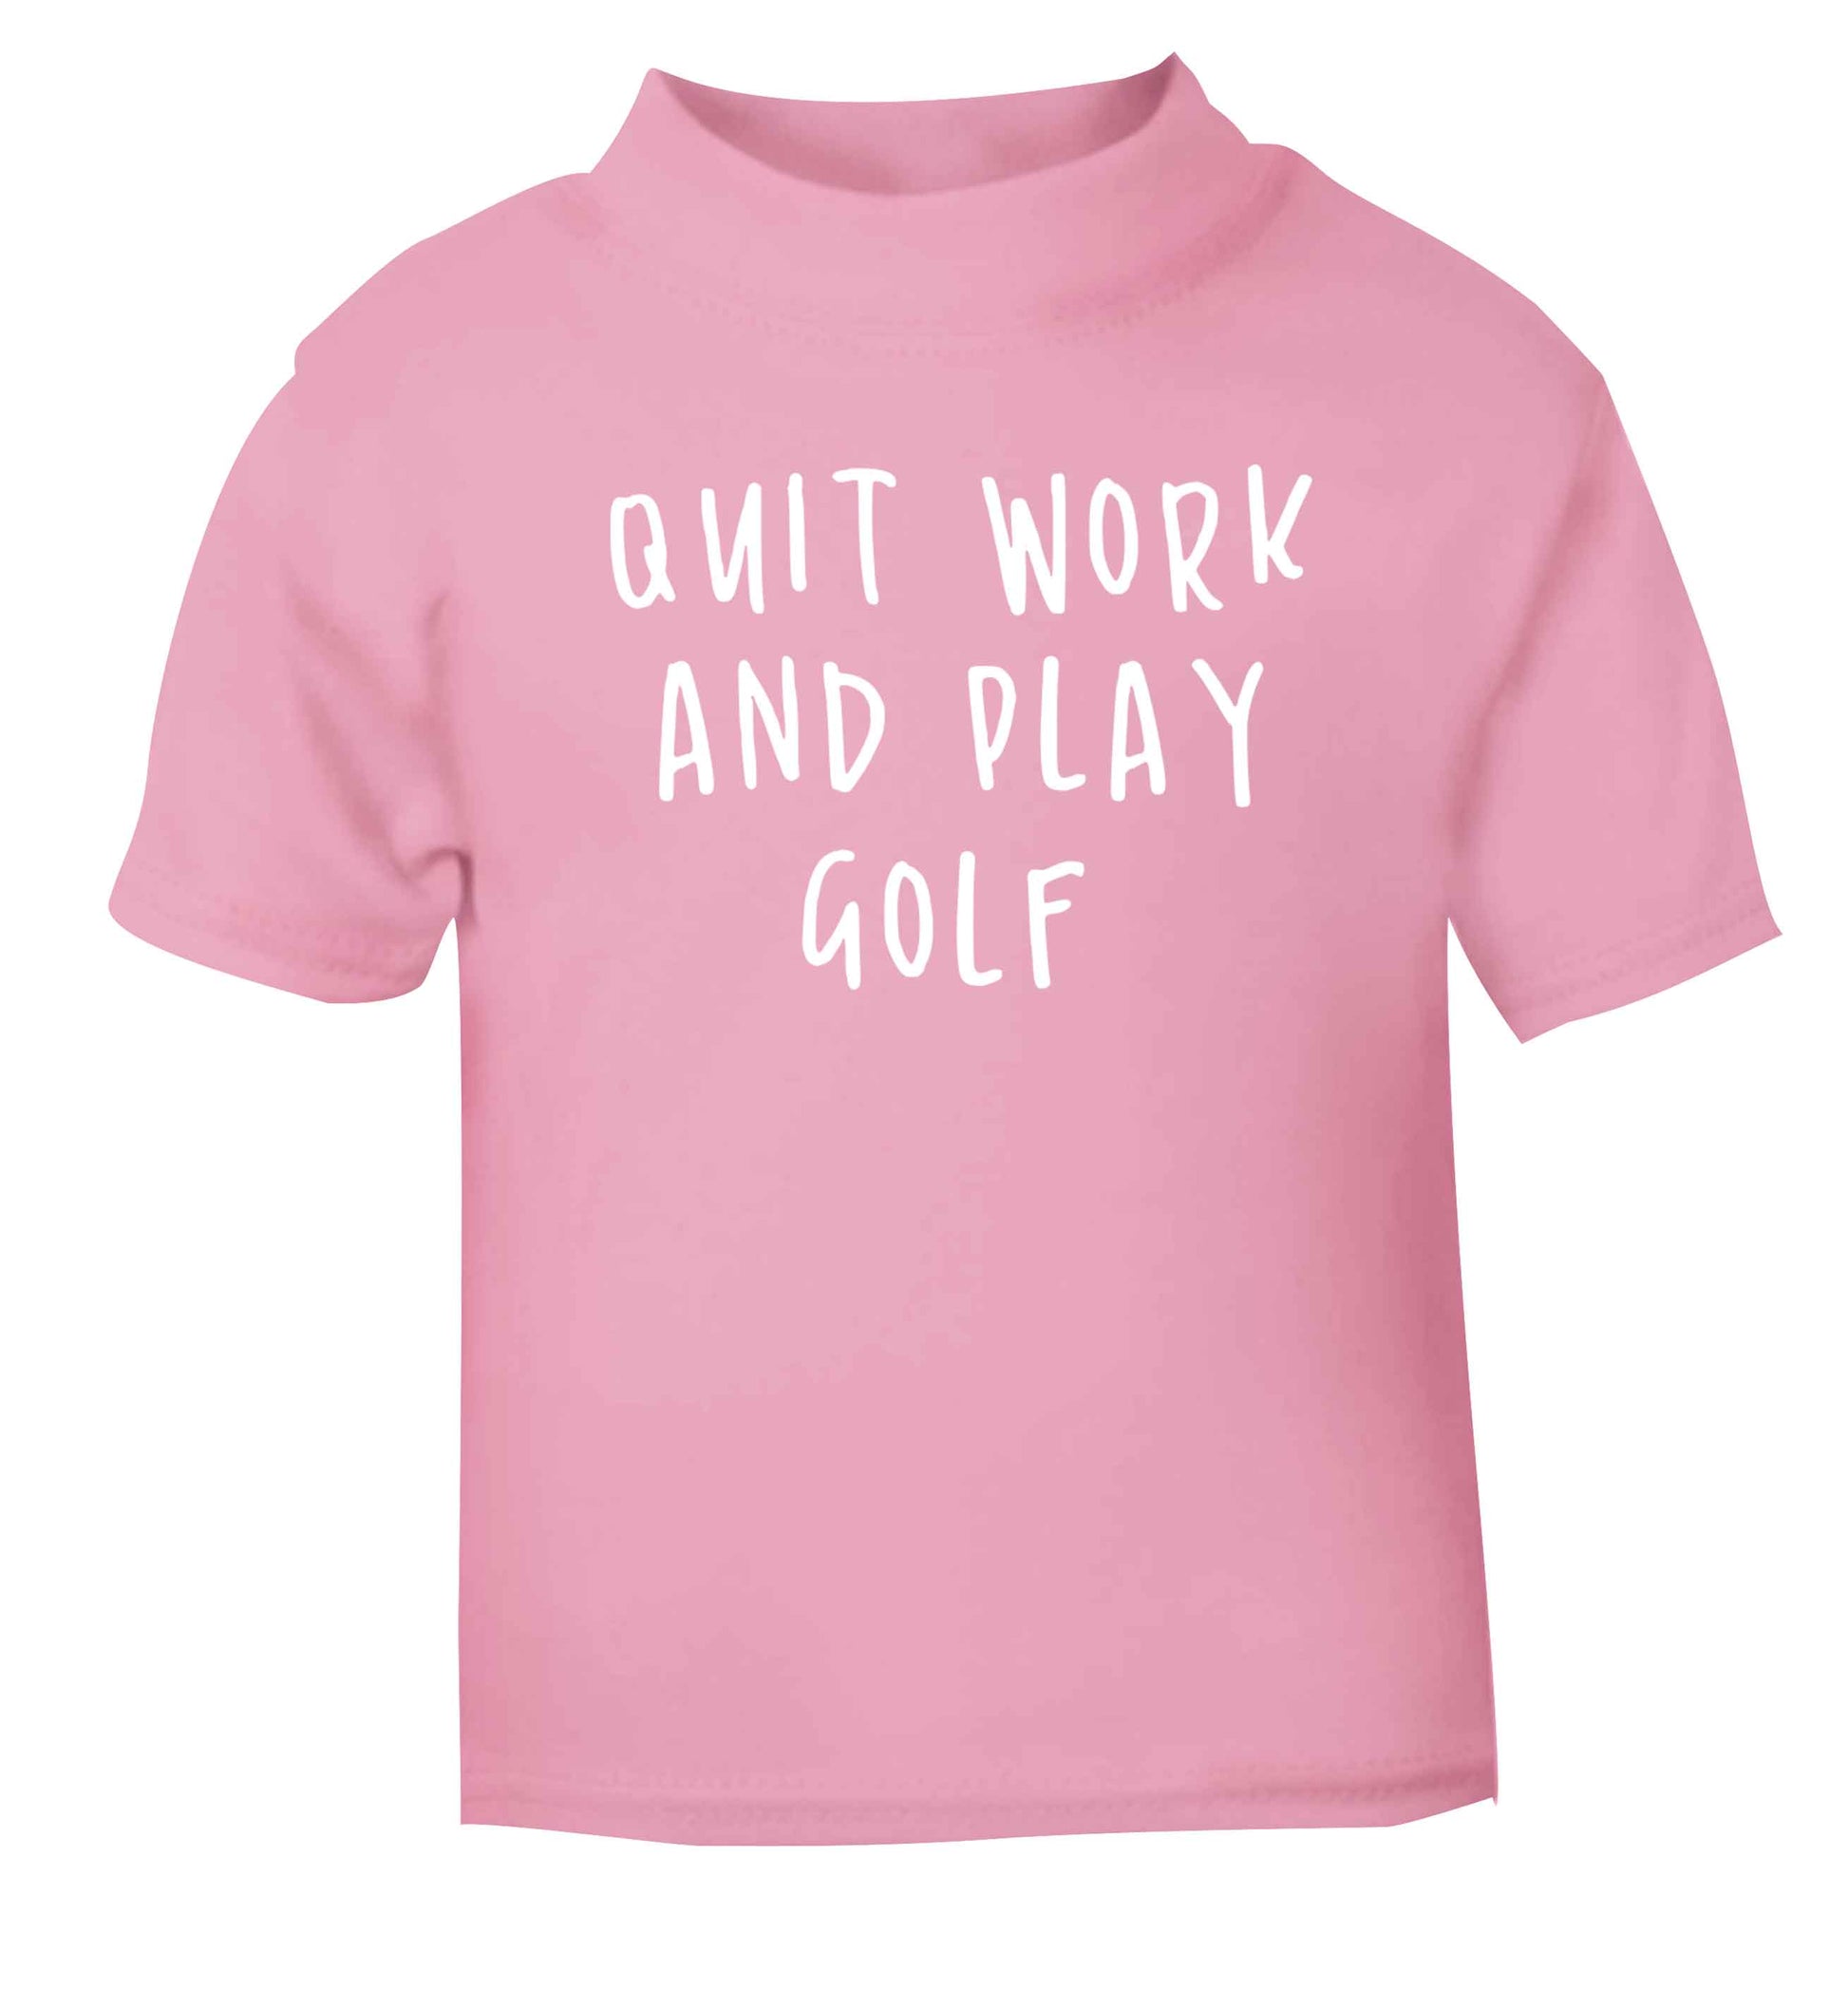 Quit work and play golf light pink Baby Toddler Tshirt 2 Years